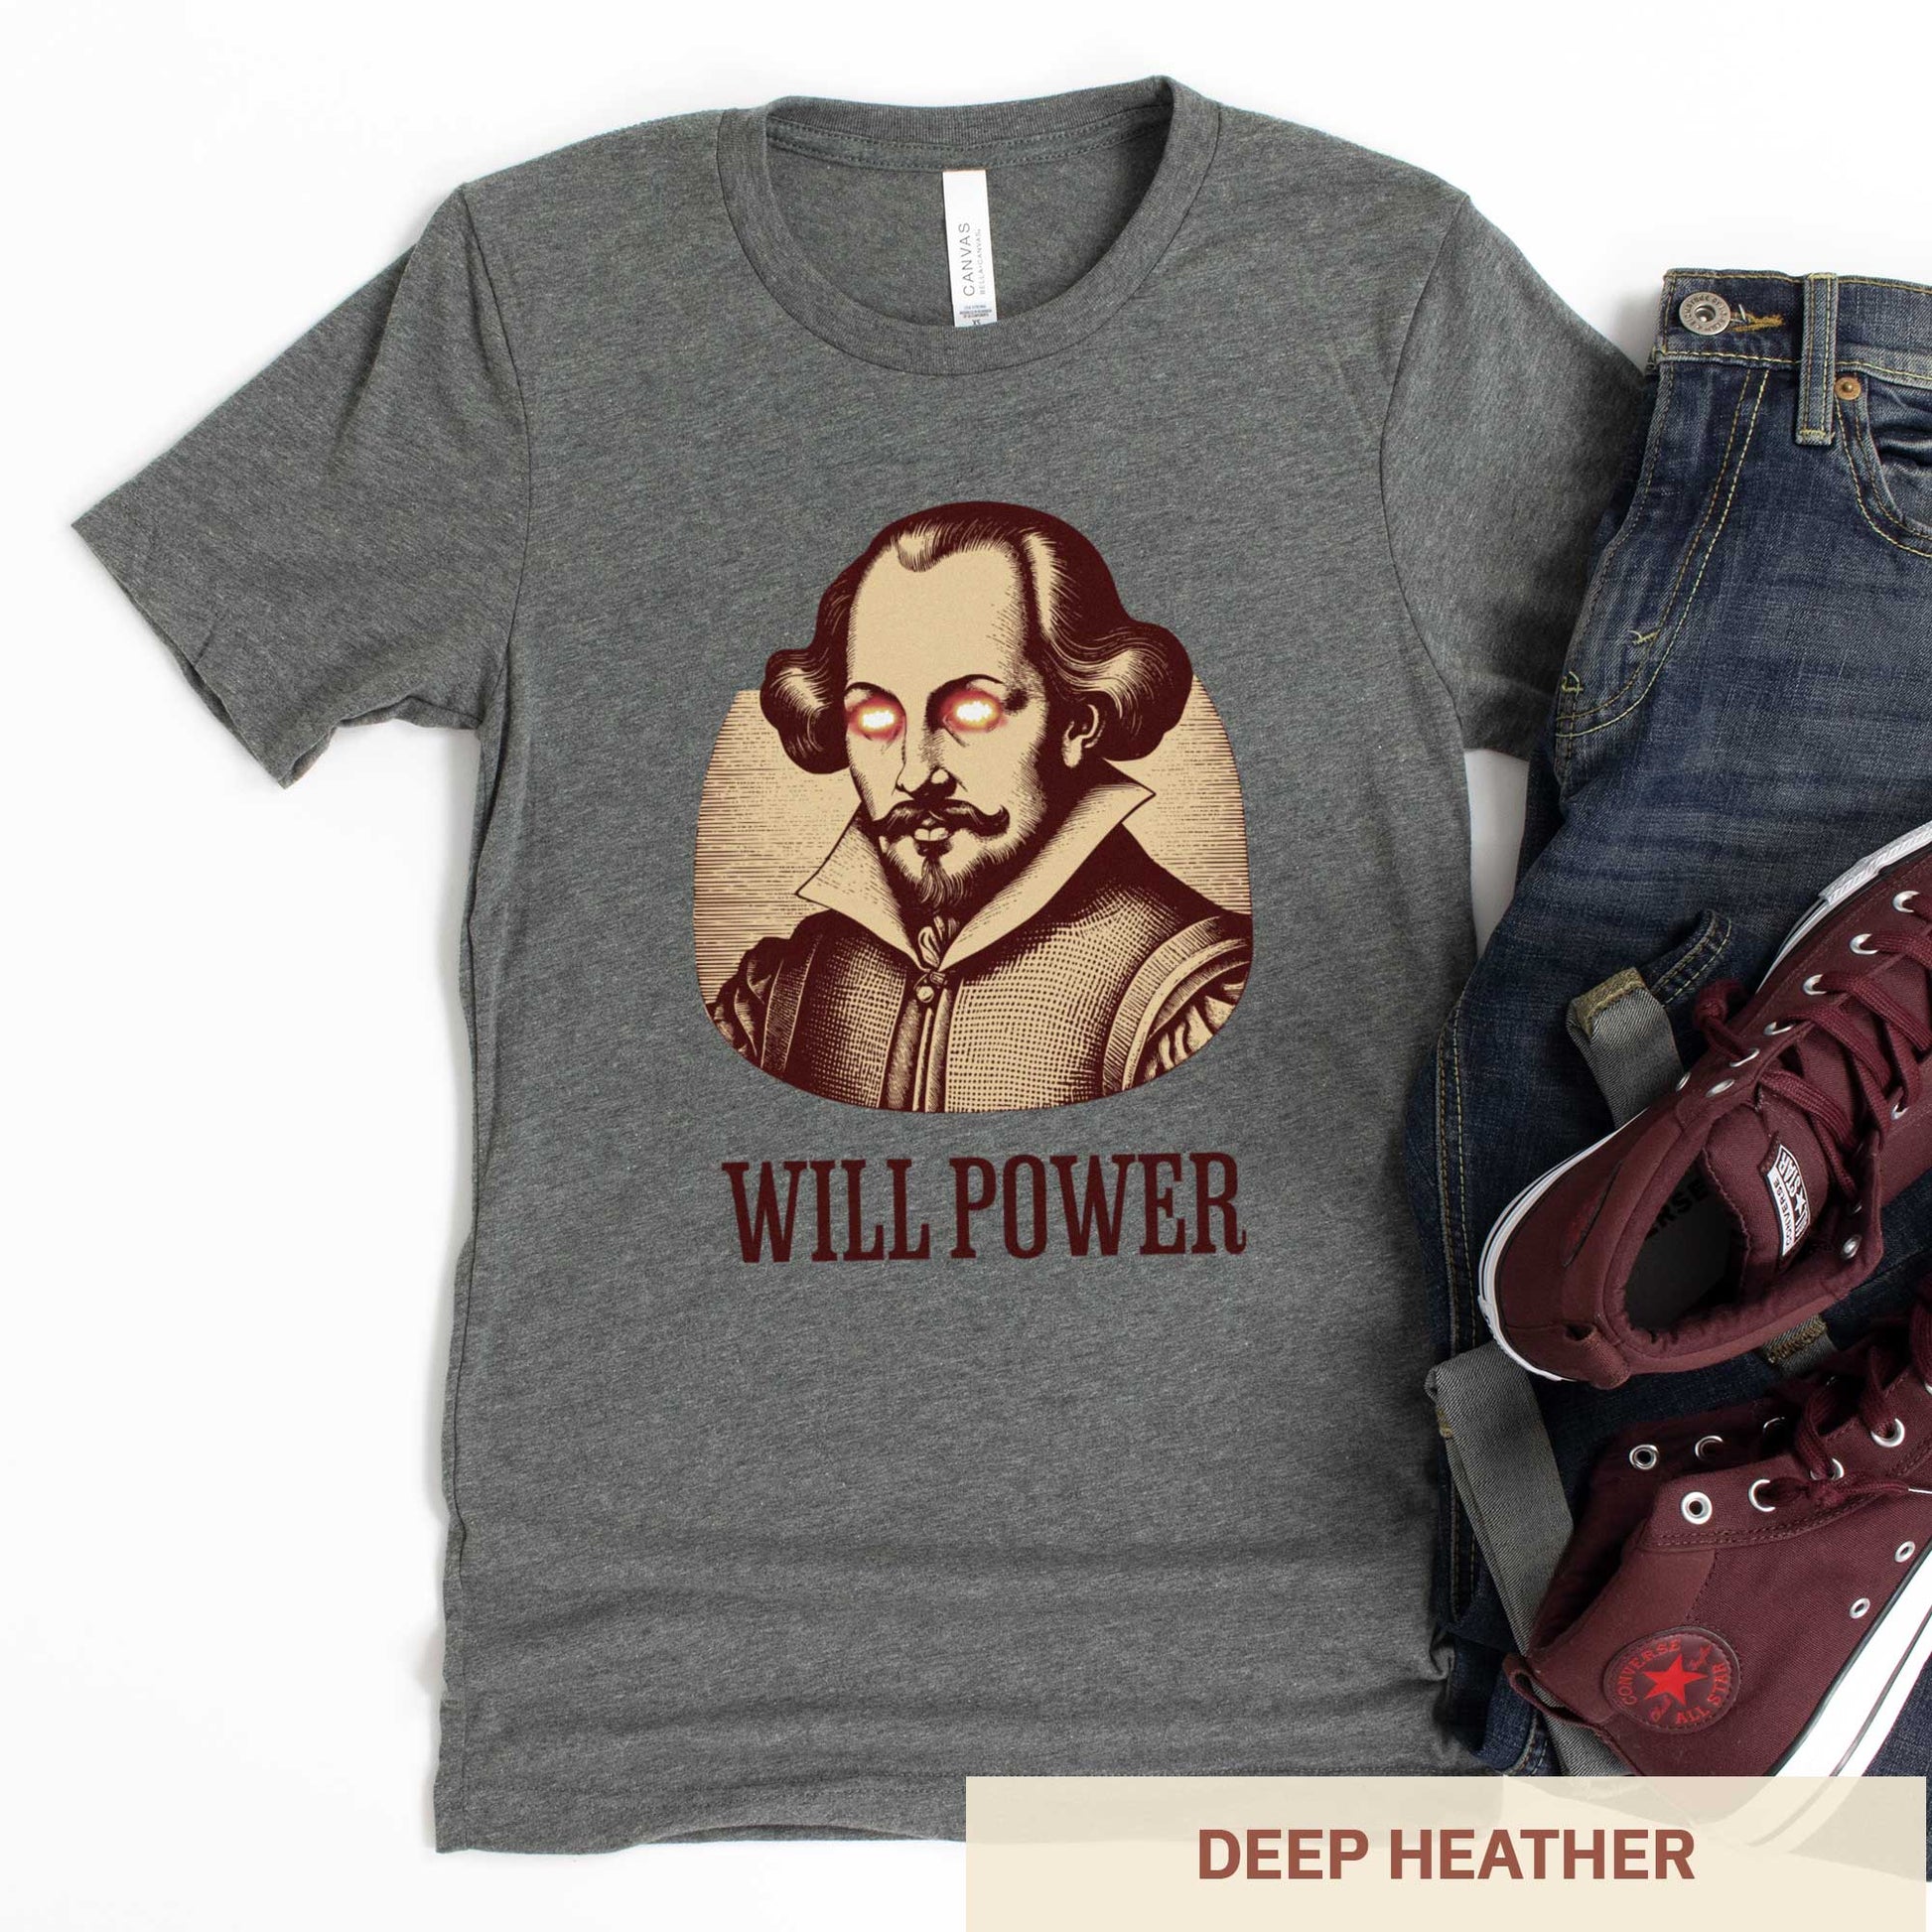 A deep heather grey Bella Canvas t-shirt featuring a woodcut of William Shakespeare with glowing superhero eyes and the words Will Power.